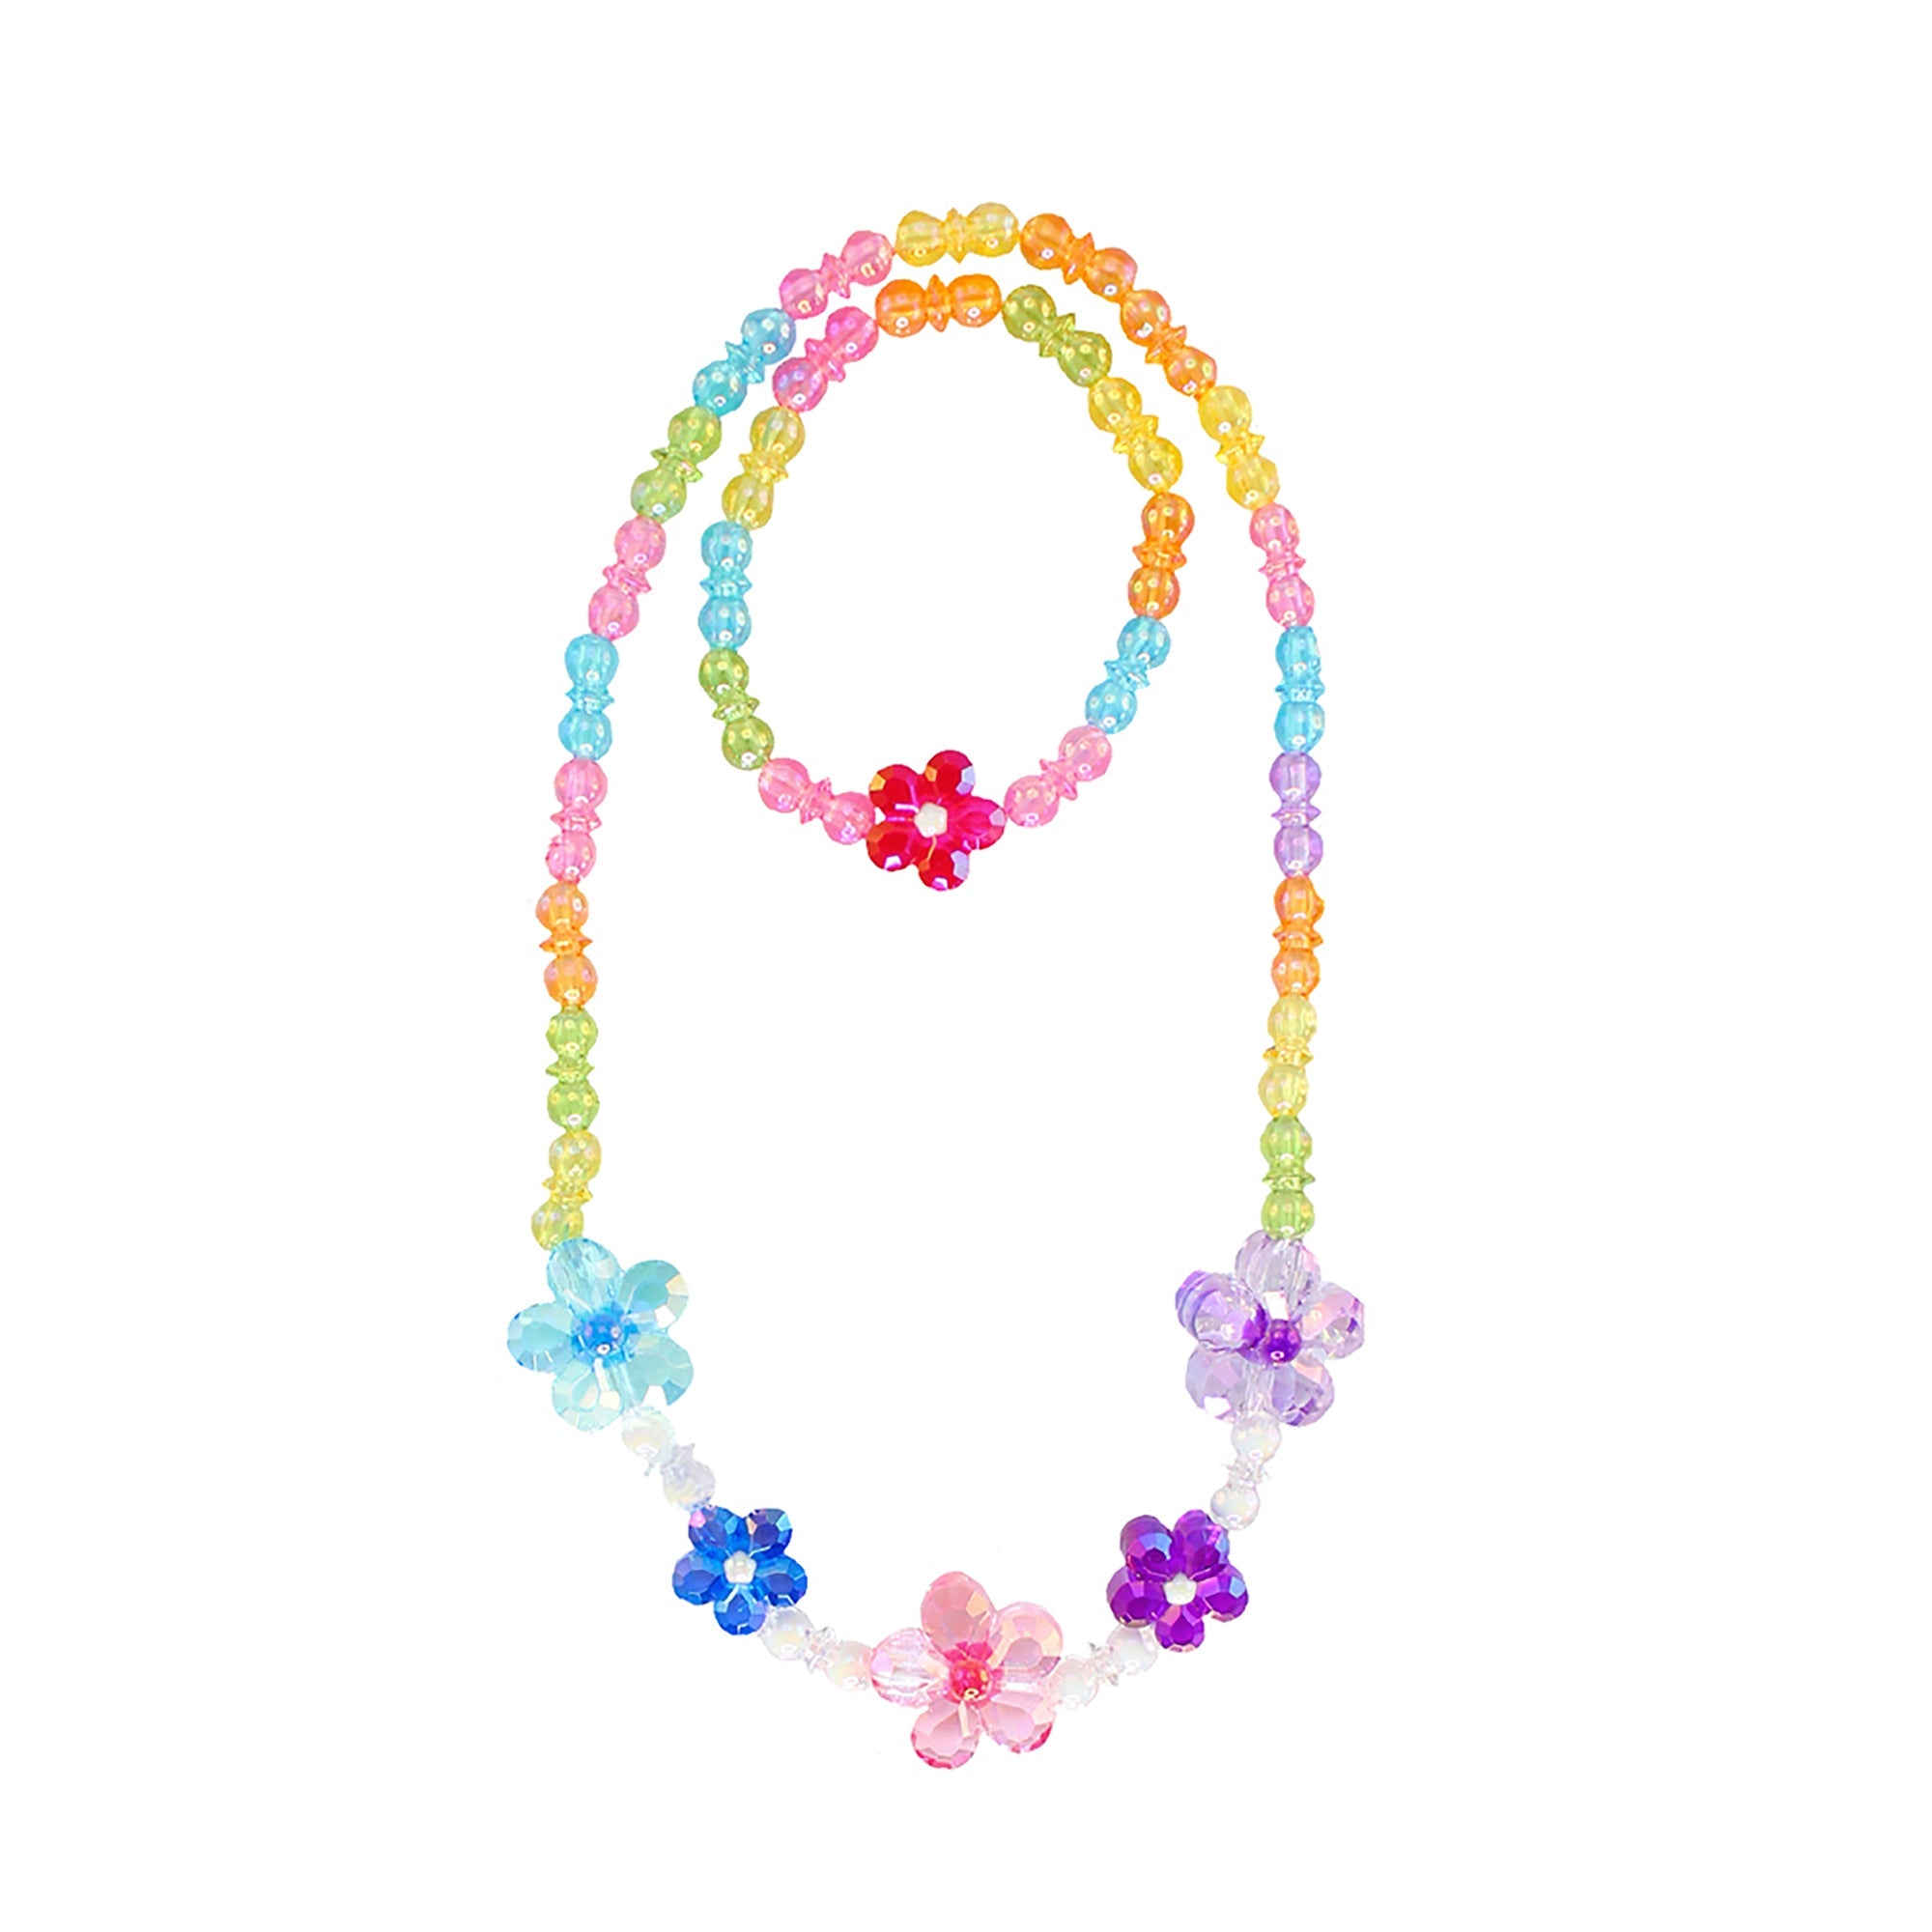 Kid's Jewelry Blooming Beads Necklace and Bracelet Set